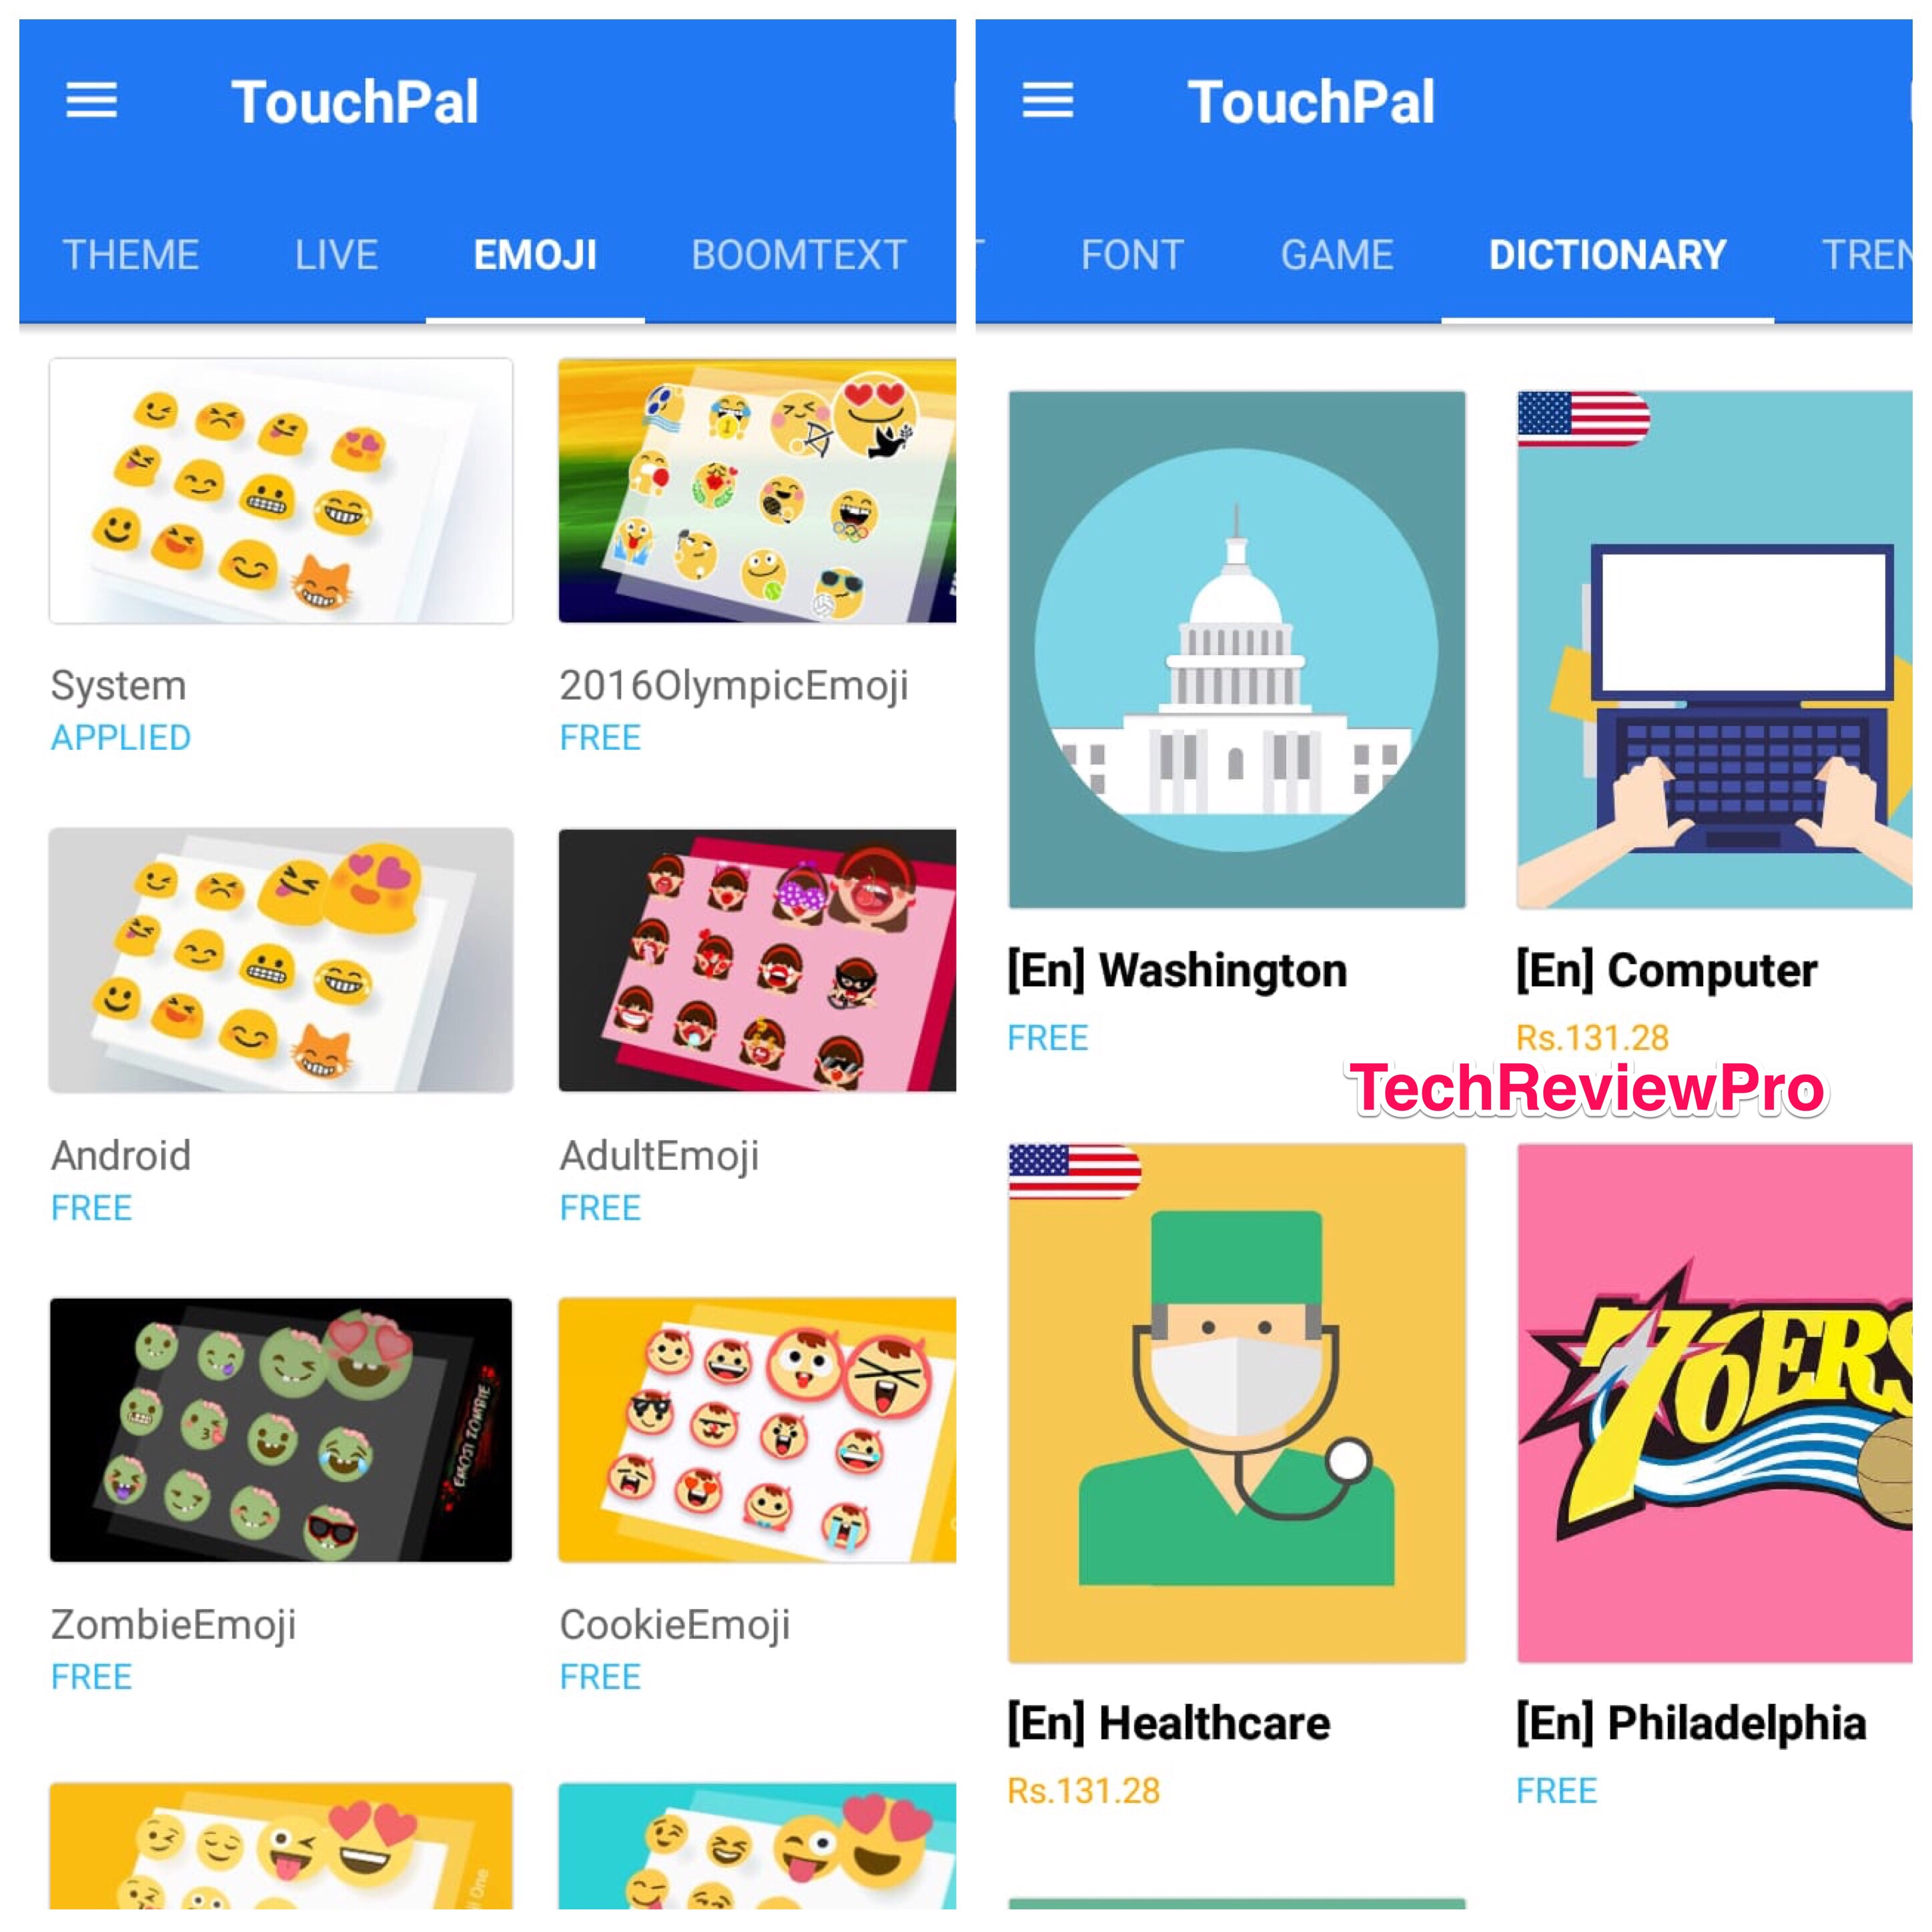 TouchPal - Best Keyboards with Emojis for Android - Best Emoji Keyboard App